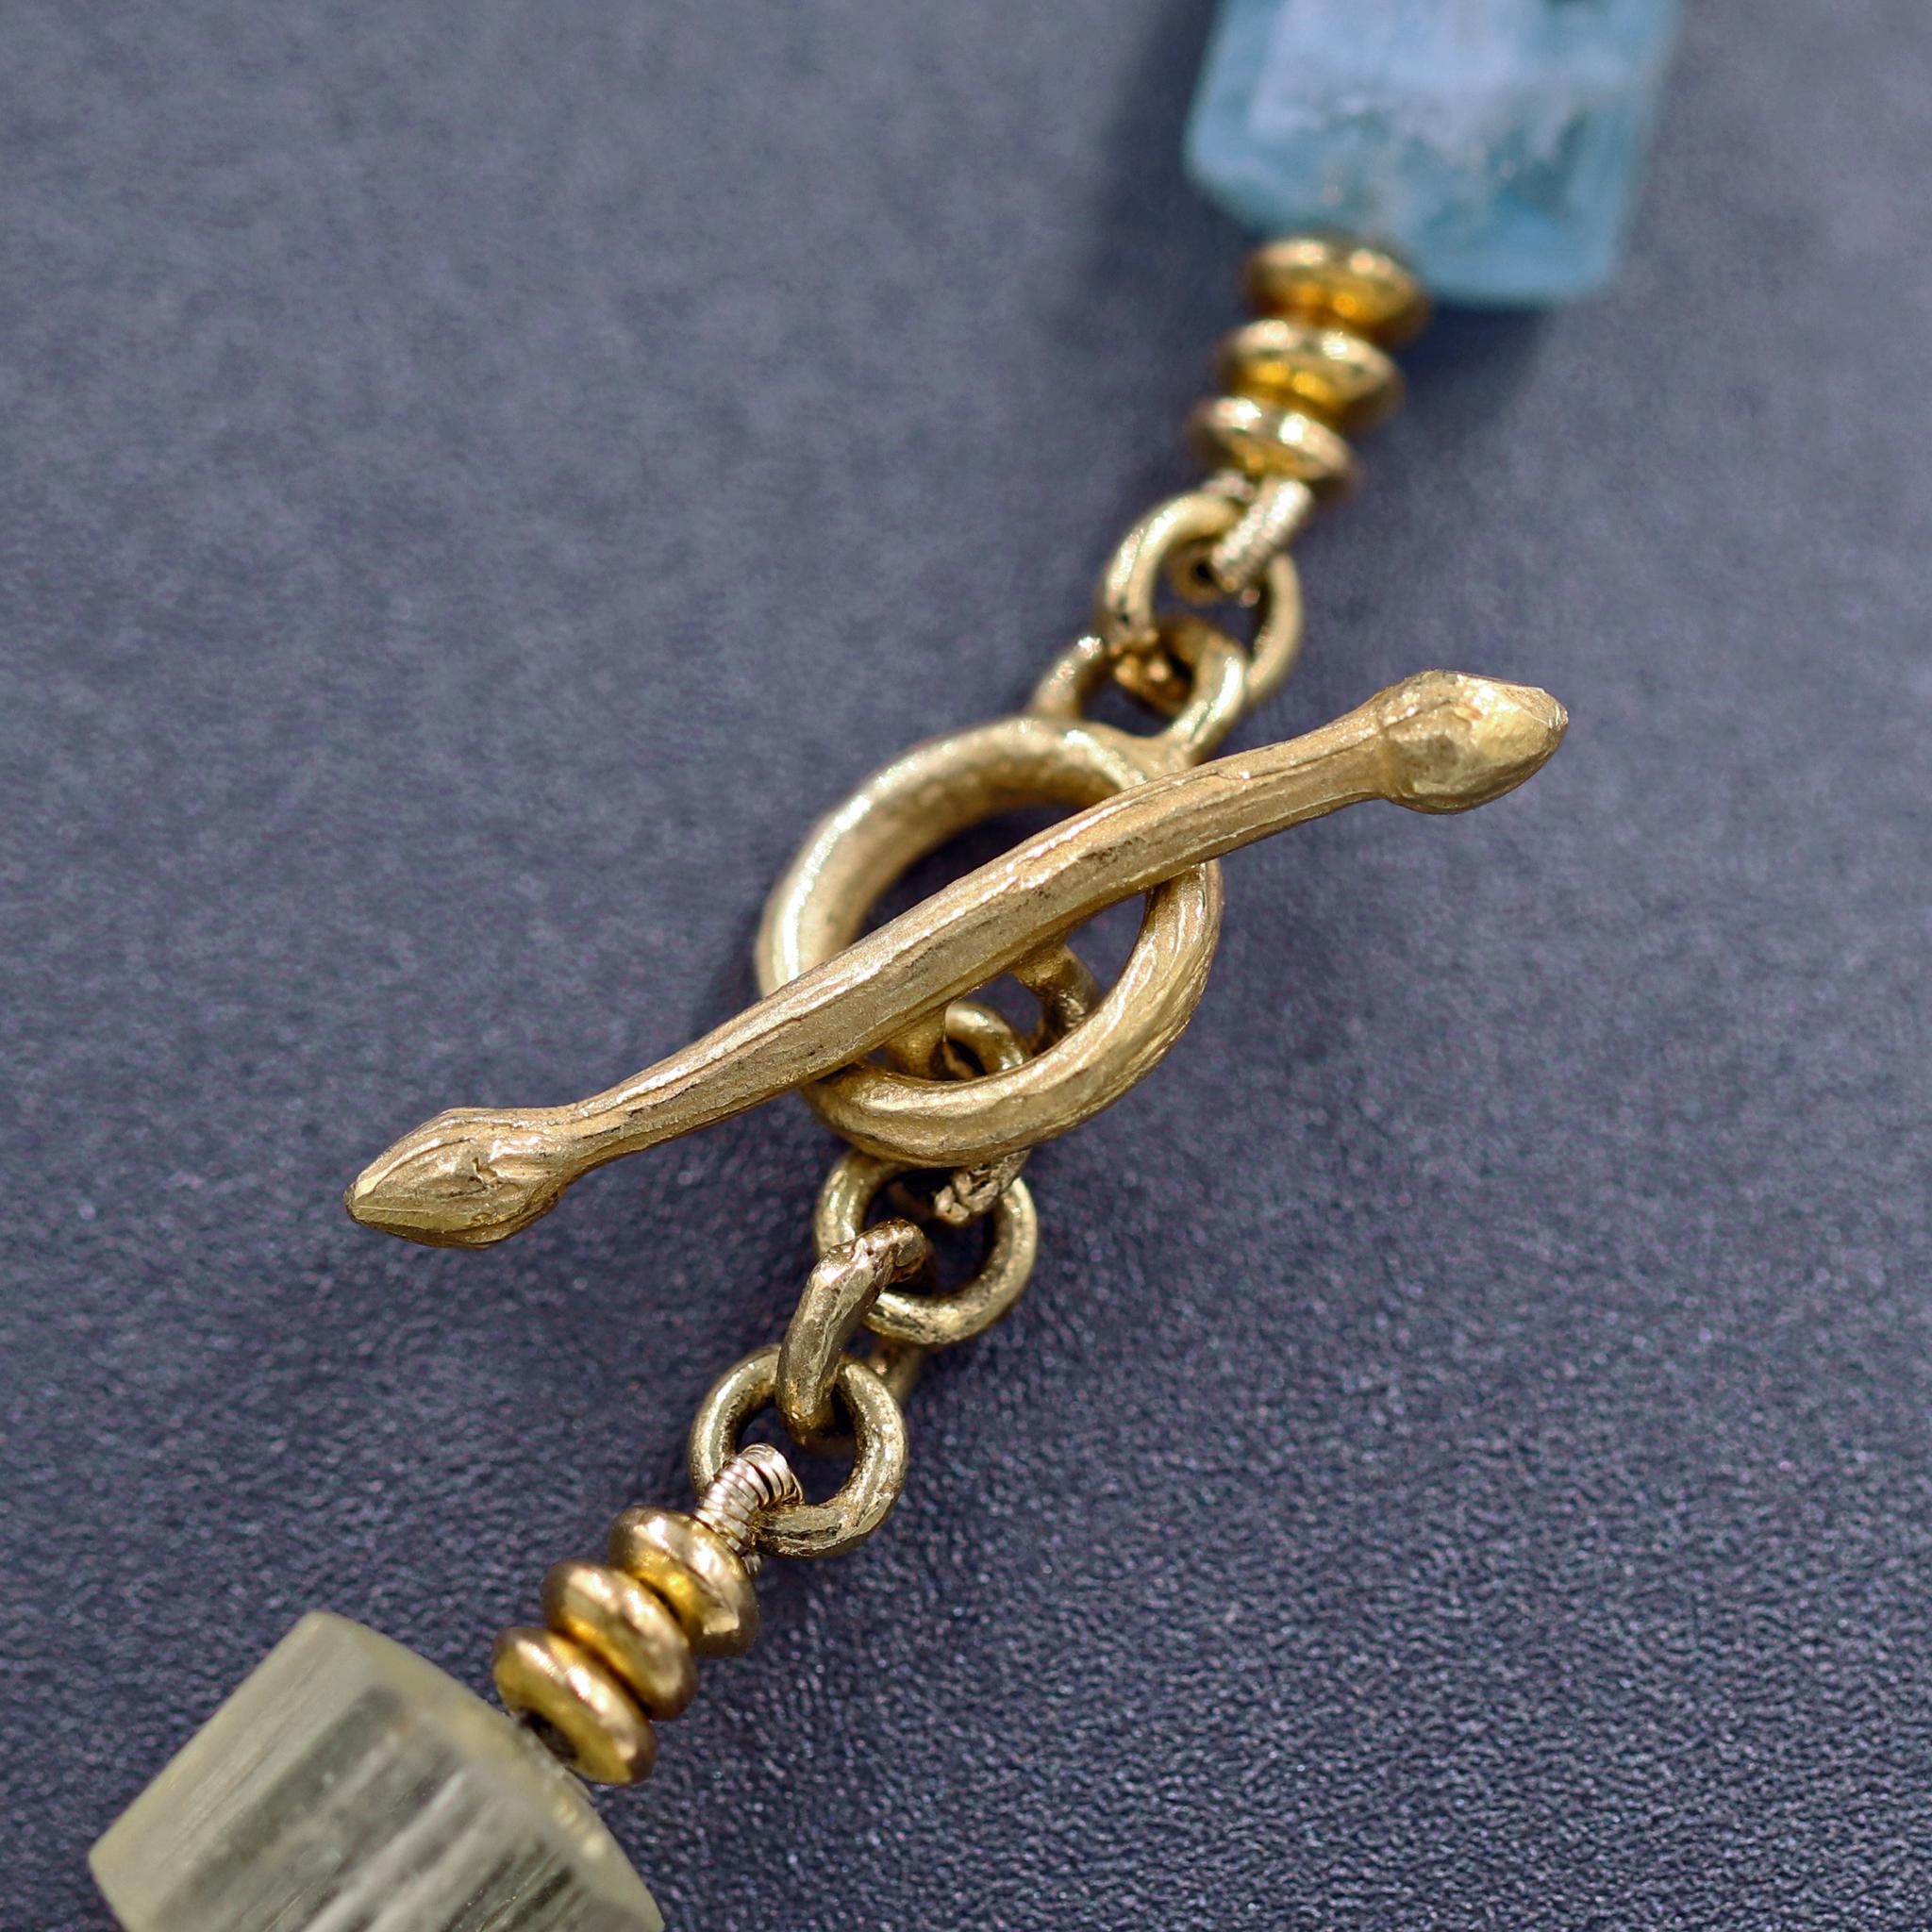 aquamarine tube necklace with 18kt gold chain